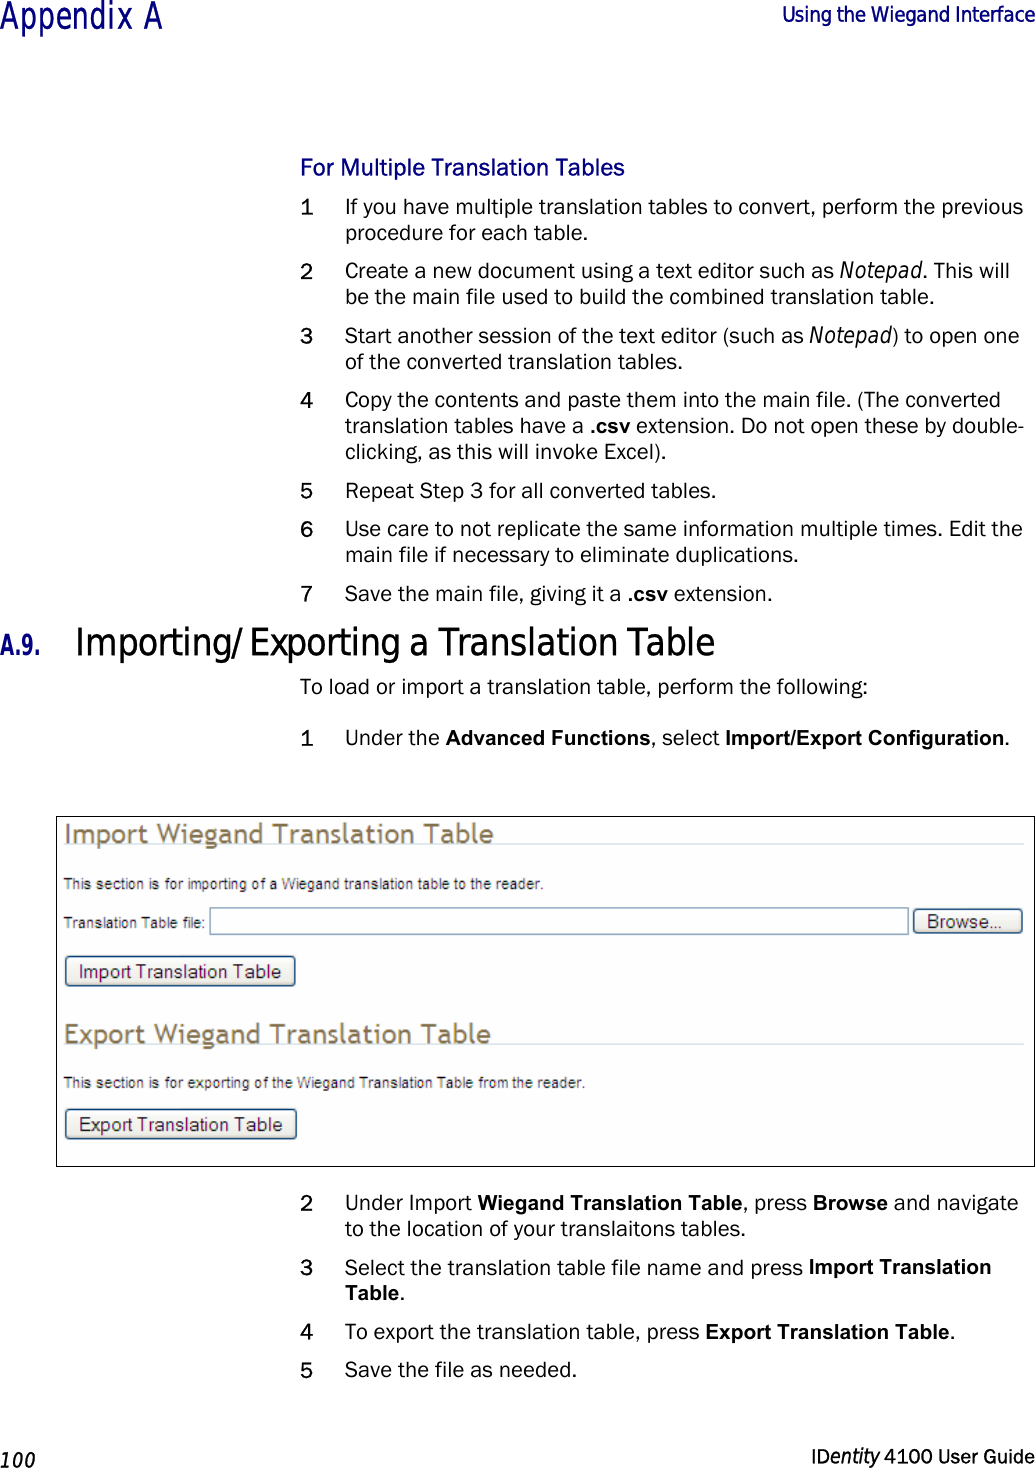  Appendix A  Using the Wiegand Interface   100  IDentity 4100 User Guide  For Multiple Translation Tables 1 If you have multiple translation tables to convert, perform the previous procedure for each table. 2 Create a new document using a text editor such as Notepad. This will be the main file used to build the combined translation table. 3 Start another session of the text editor (such as Notepad) to open one of the converted translation tables.  4 Copy the contents and paste them into the main file. (The converted translation tables have a .csv extension. Do not open these by double-clicking, as this will invoke Excel).  5 Repeat Step 3 for all converted tables. 6 Use care to not replicate the same information multiple times. Edit the main file if necessary to eliminate duplications. 7 Save the main file, giving it a .csv extension. A.9. Importing/Exporting a Translation Table To load or import a translation table, perform the following: 1 Under the Advanced Functions, select Import/Export Configuration.   2 Under Import Wiegand Translation Table, press Browse and navigate to the location of your translaitons tables. 3 Select the translation table file name and press Import Translation Table. 4 To export the translation table, press Export Translation Table. 5 Save the file as needed.  